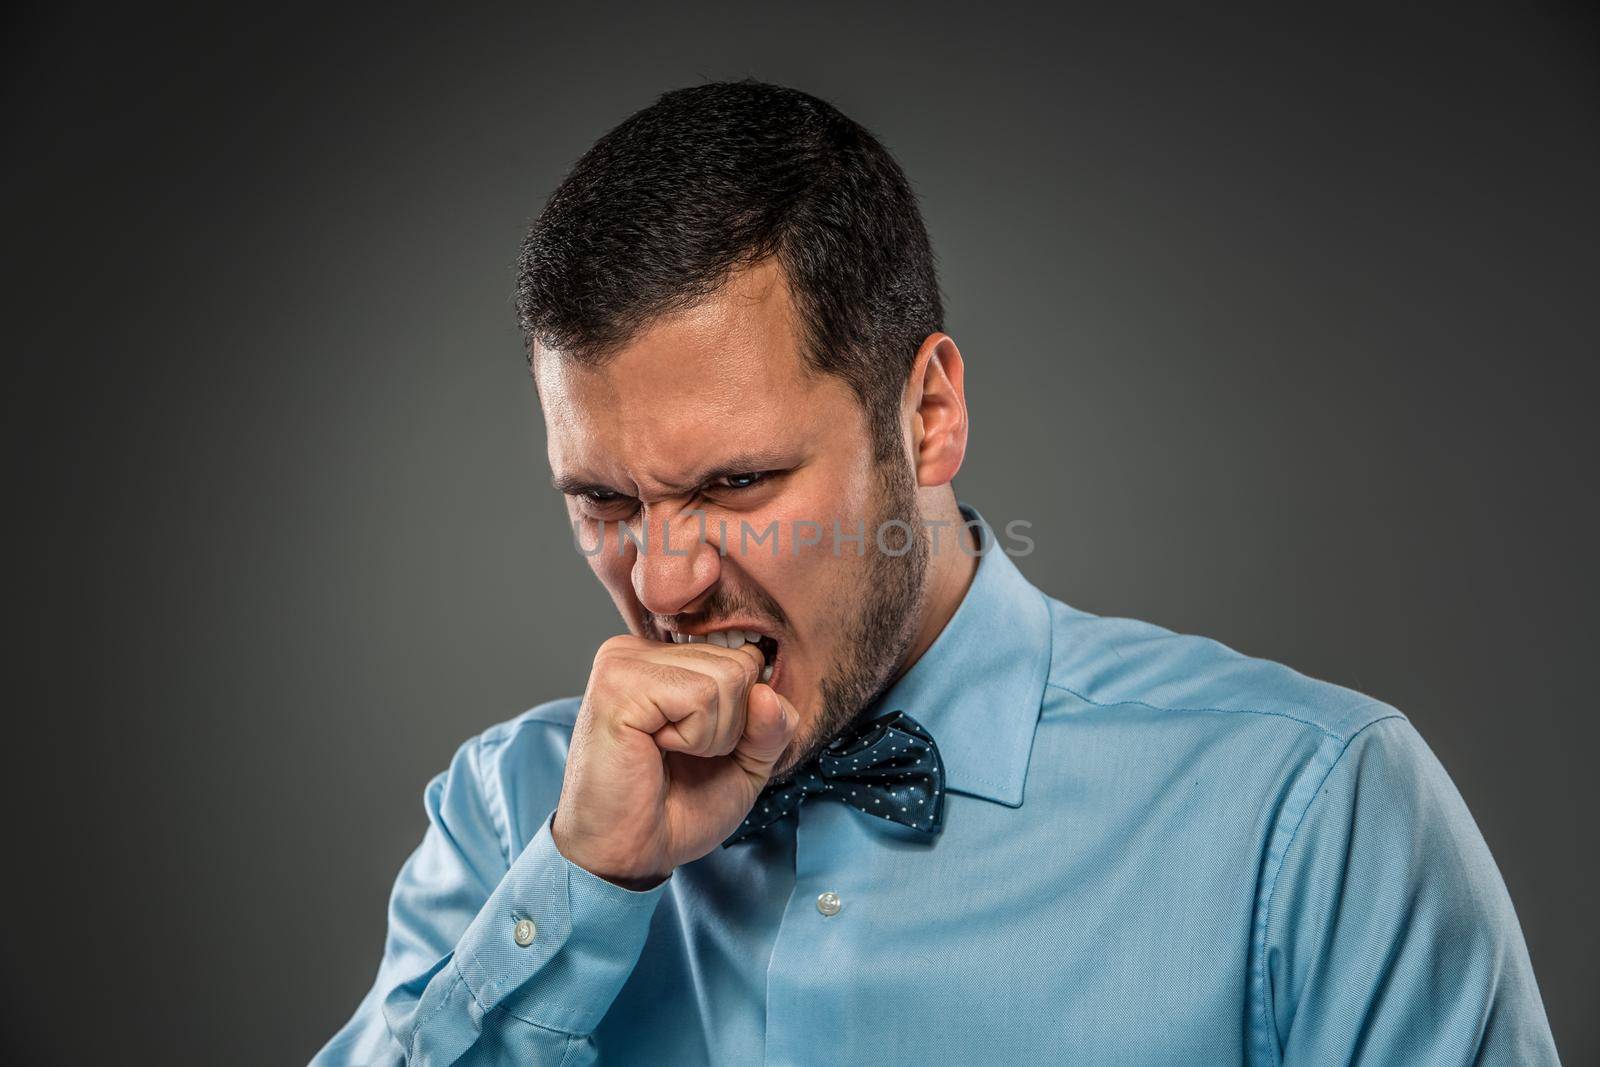 Closeup portrait of an angry guy in blue shirt and butterfly tie, biting his fist, isolated on gray background. Human emotion.